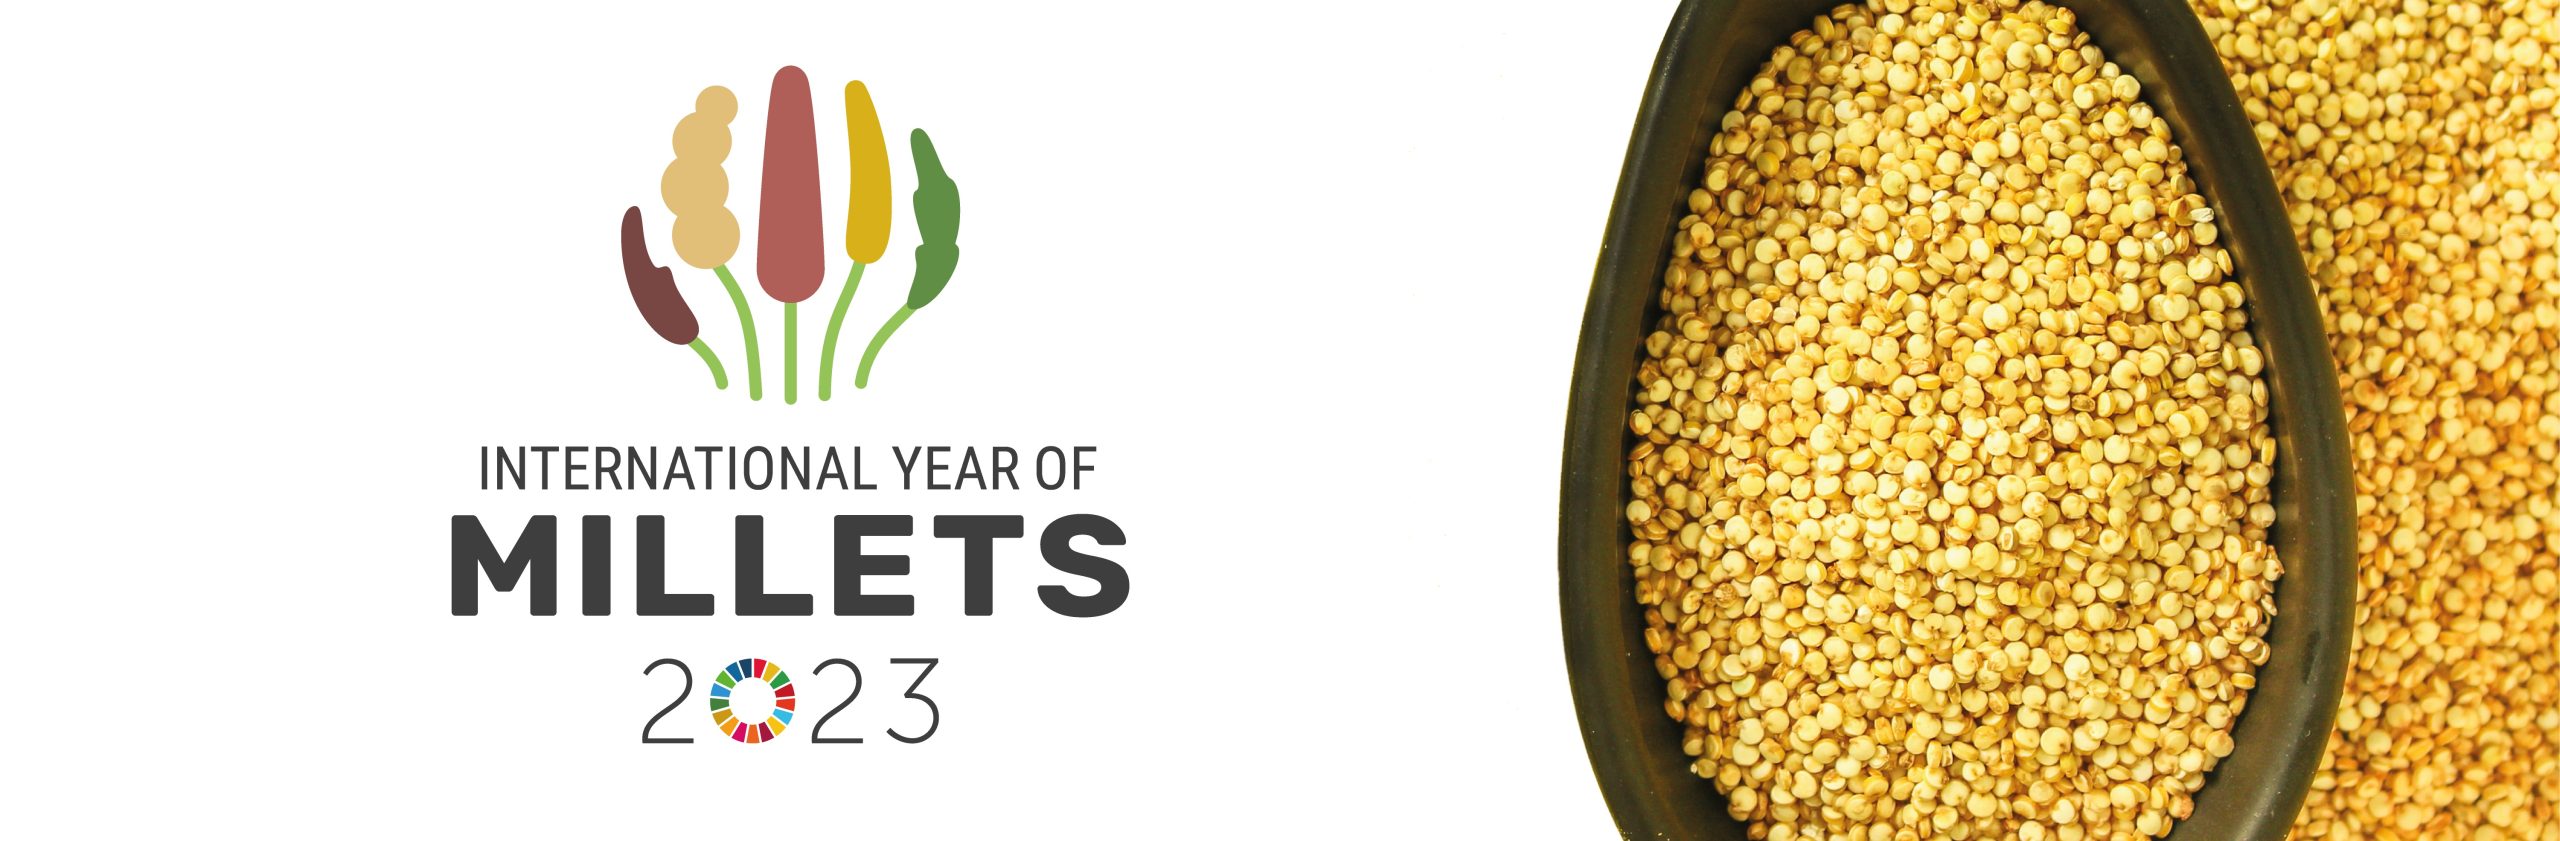 #IYM2023, millet, year of millets, fonio